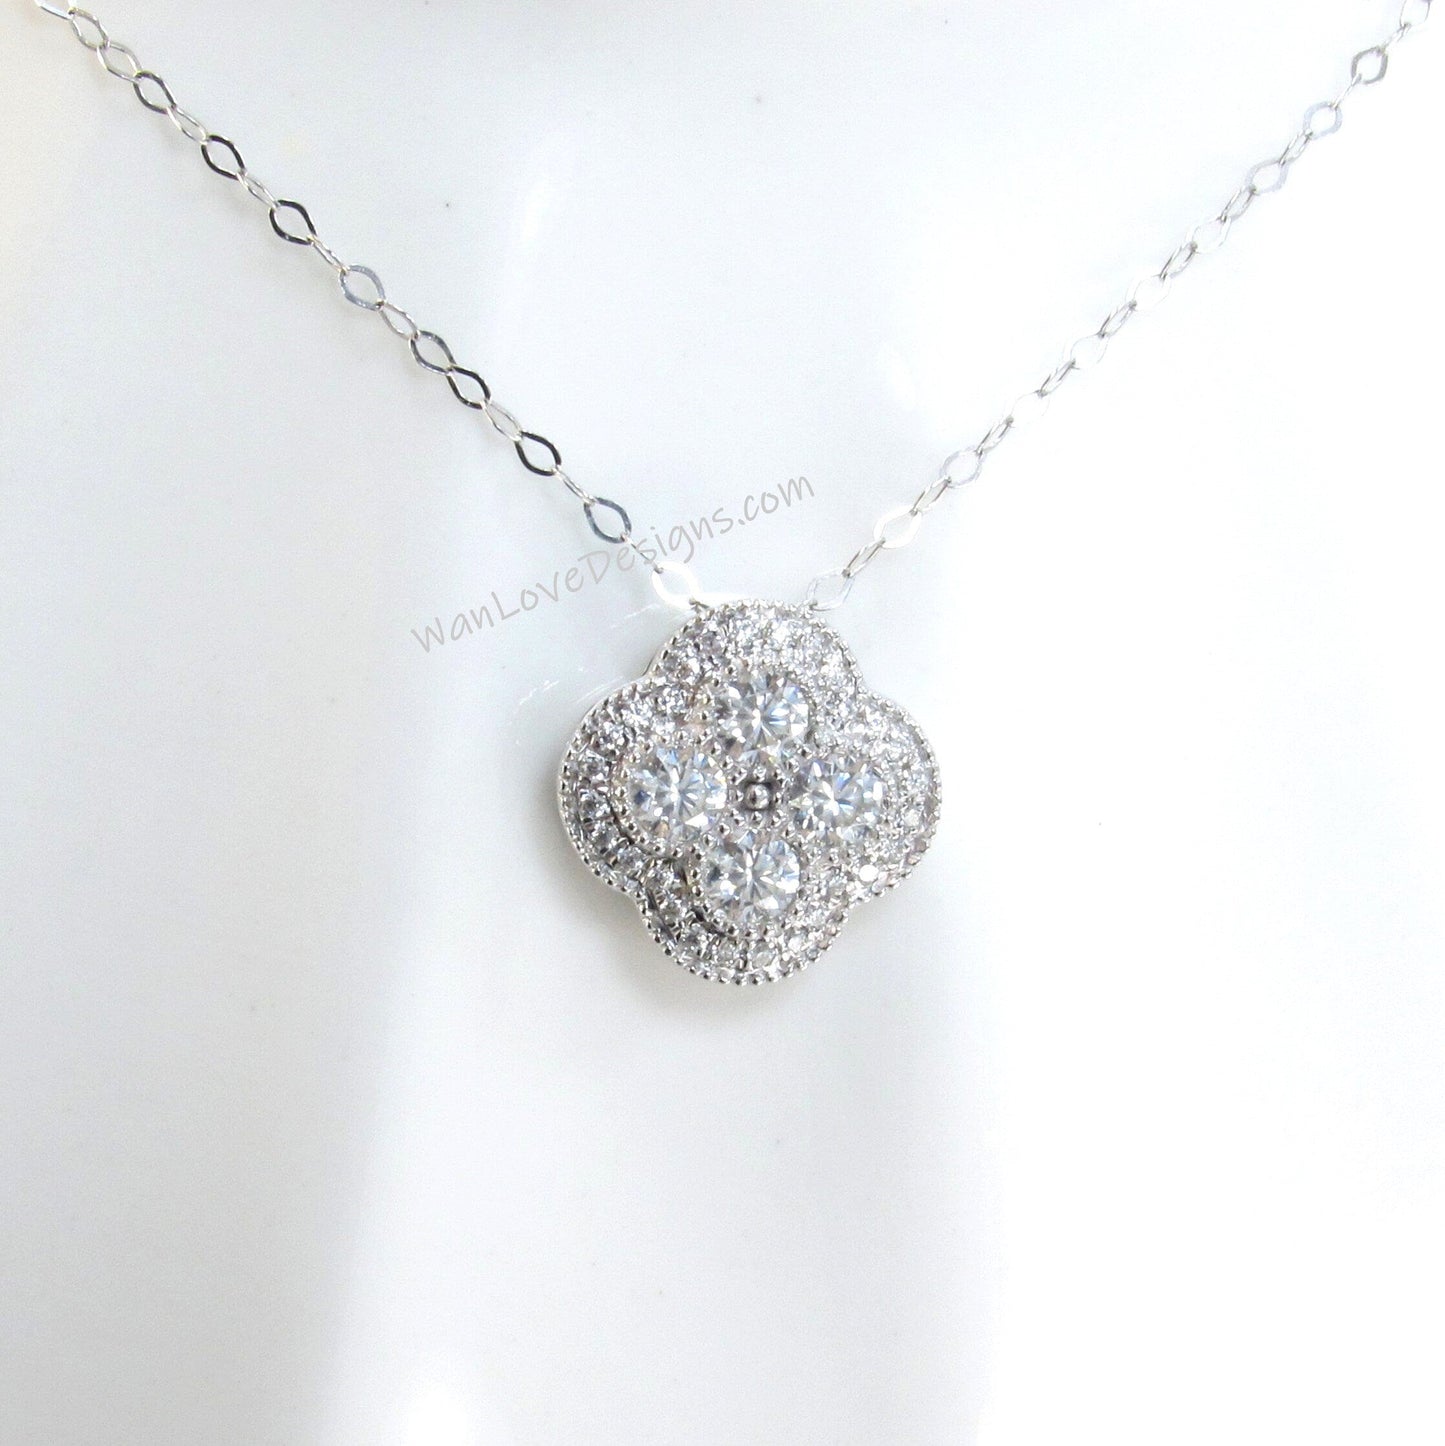 Quatrefoil Halo Moissanite Pendant Necklace Charm with Thin Chain, White Gold, Custom, Wedding, Anniversary Gift, Ready to Ship Wan Love Designs